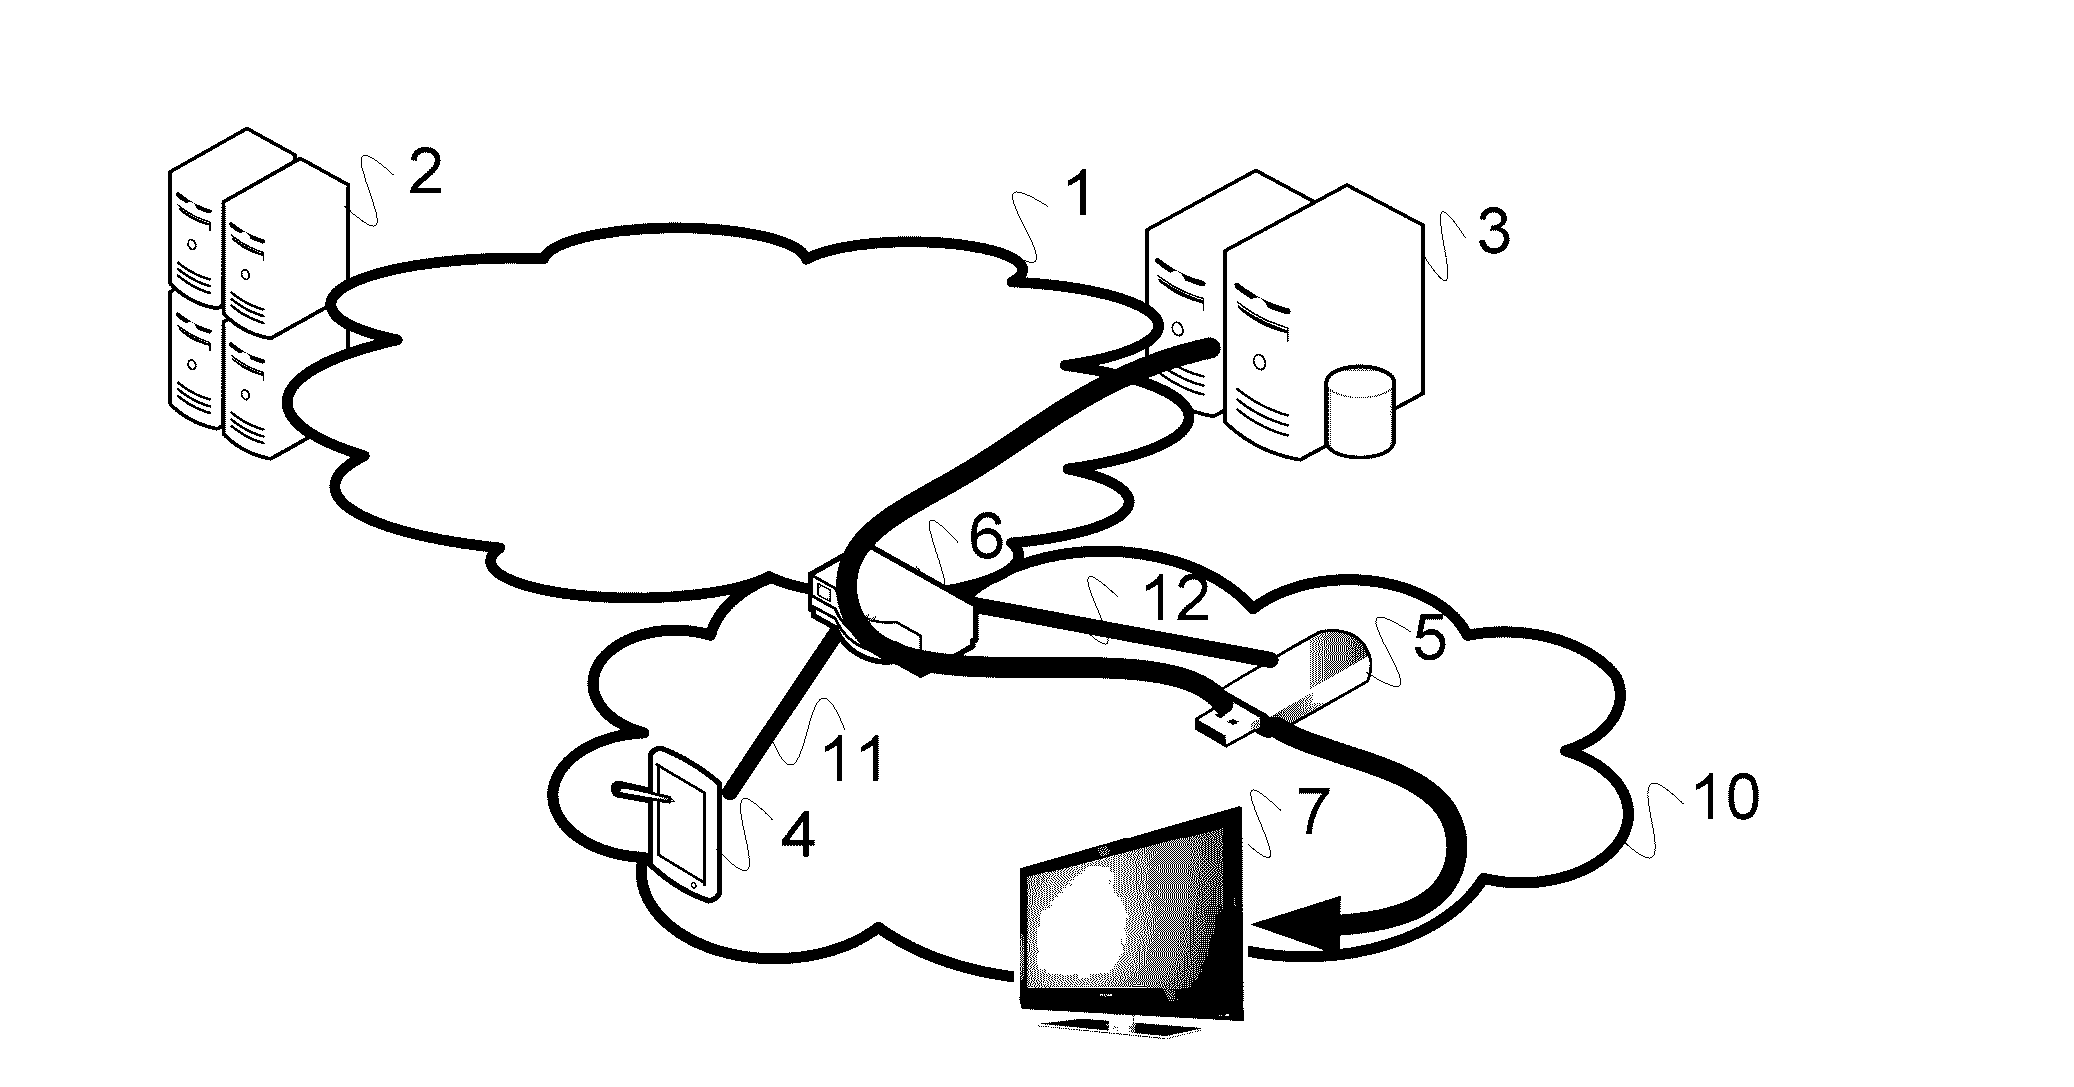 Device and method for transferring the rendering of multimedia content